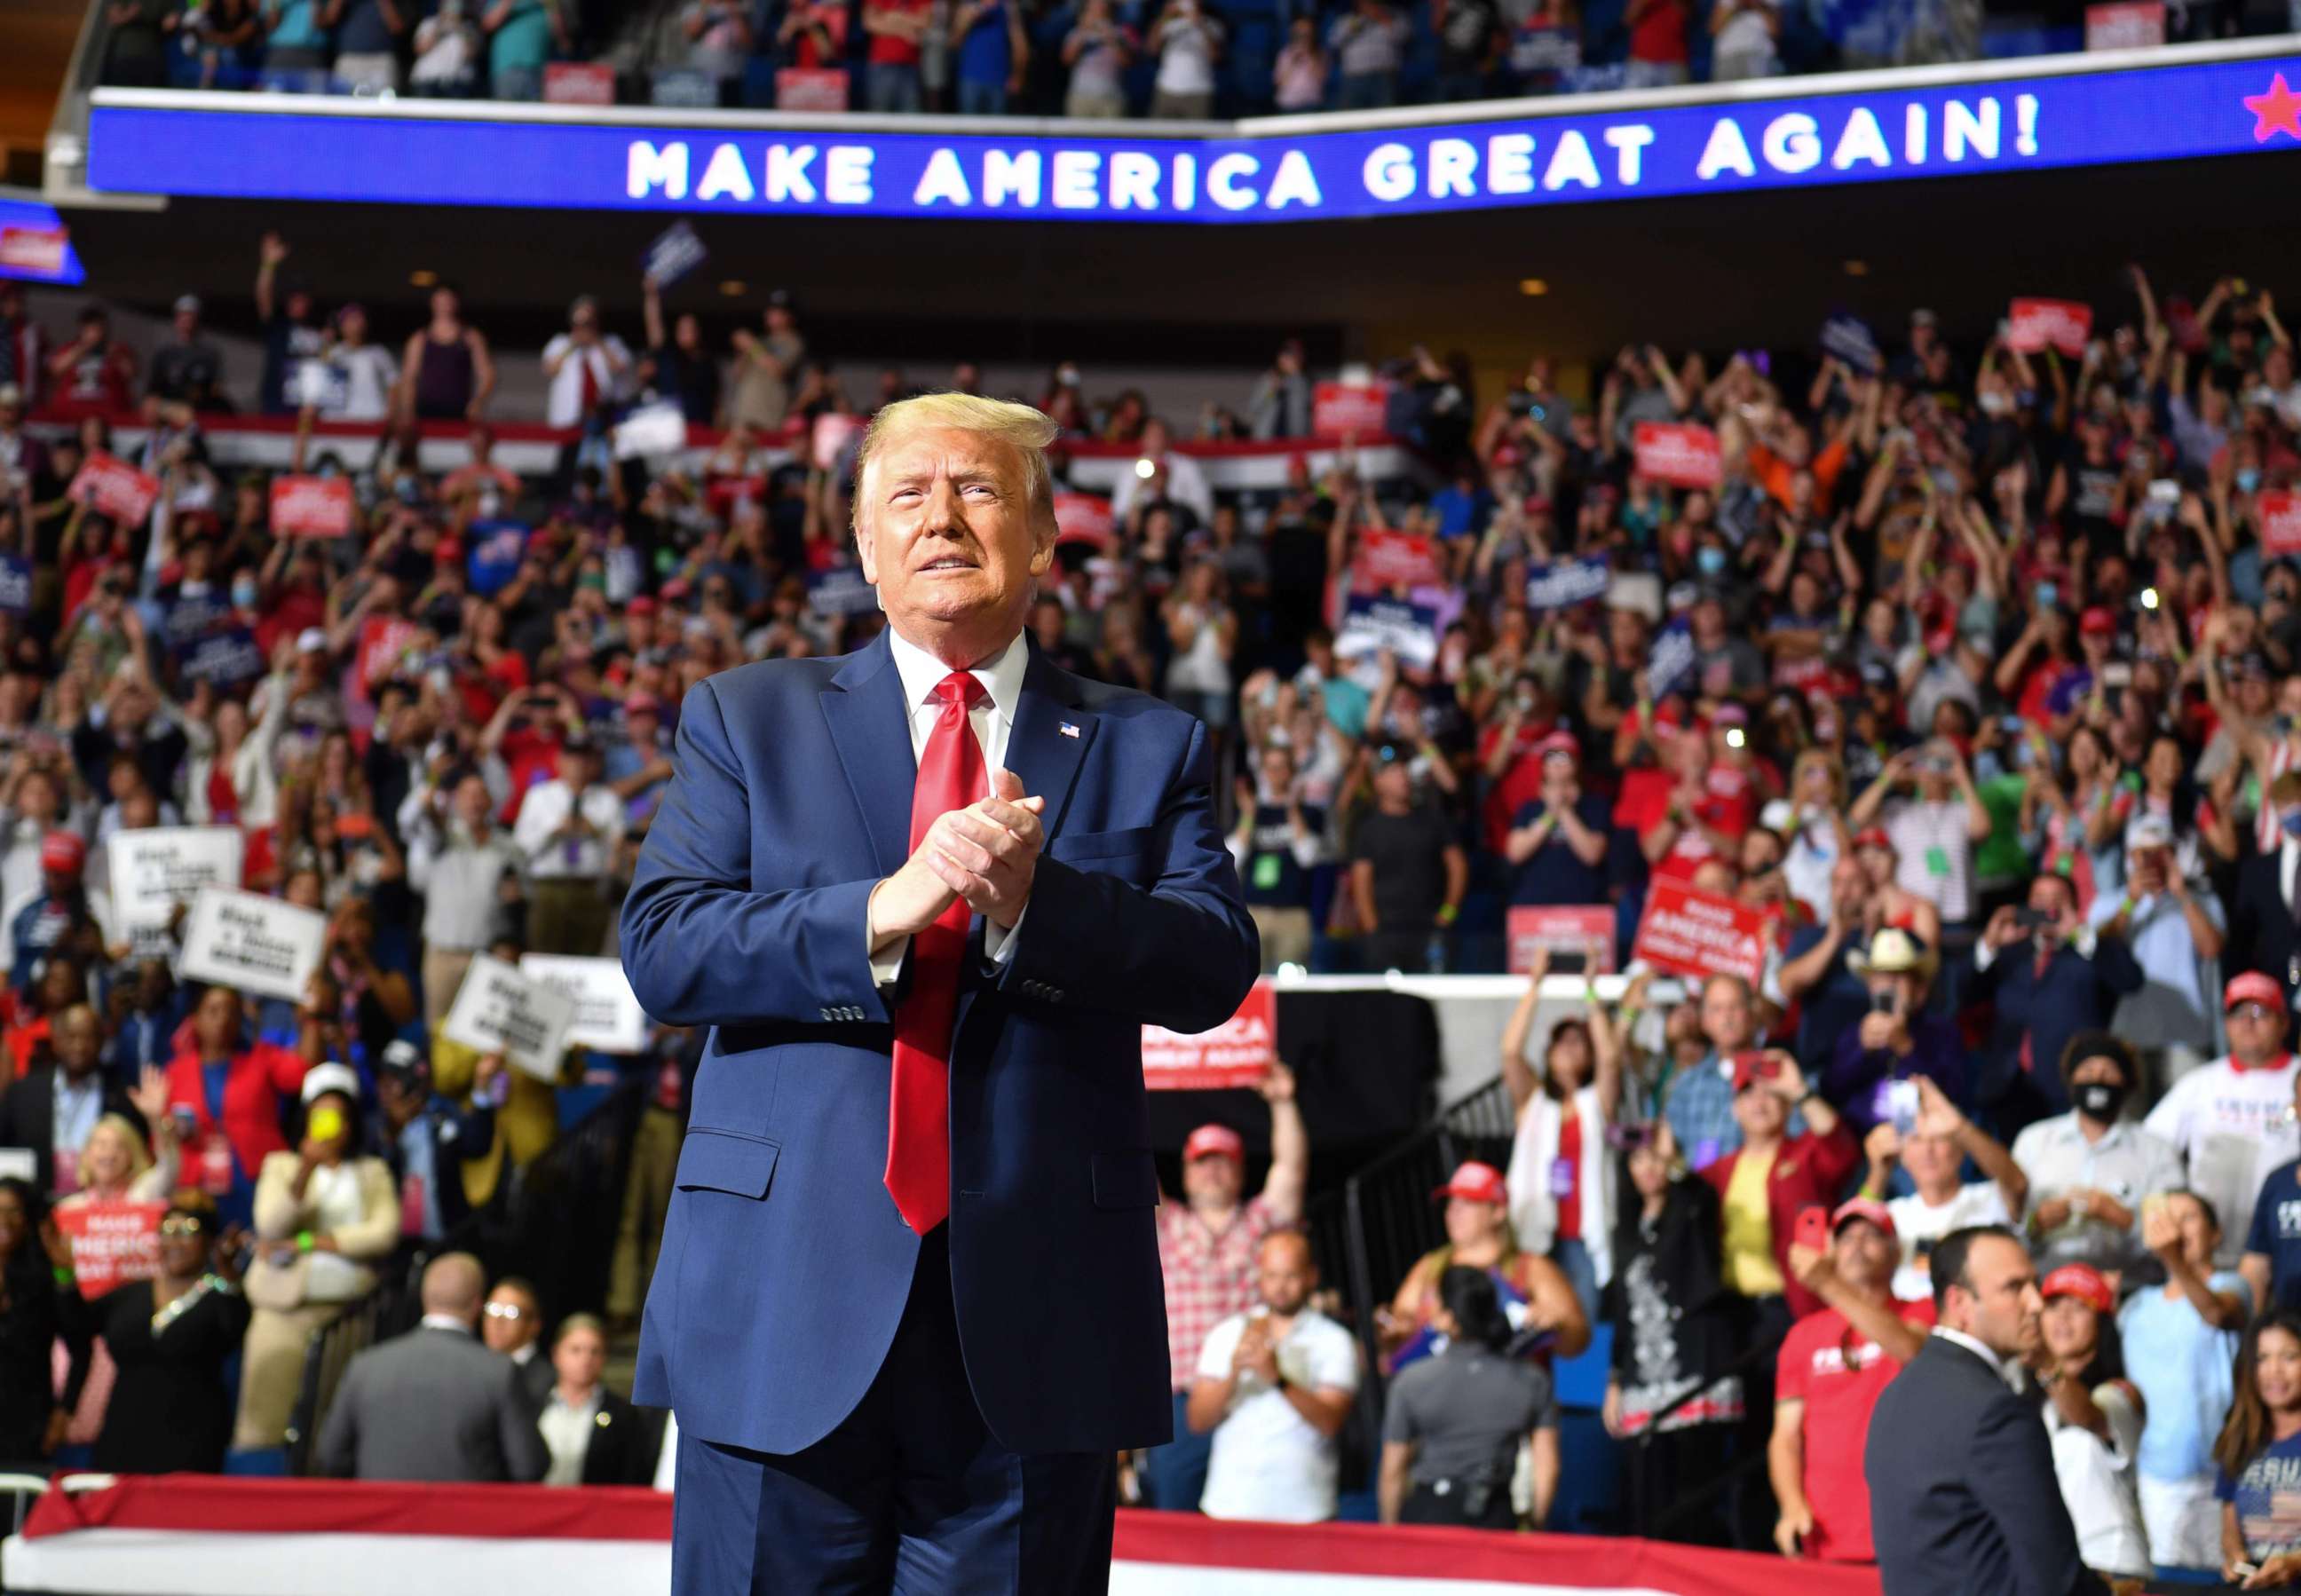 PHOTO: Donald Trump arrives for a campaign rally at the BOK Center on June 20, 2020 in Tulsa, Oklahoma.